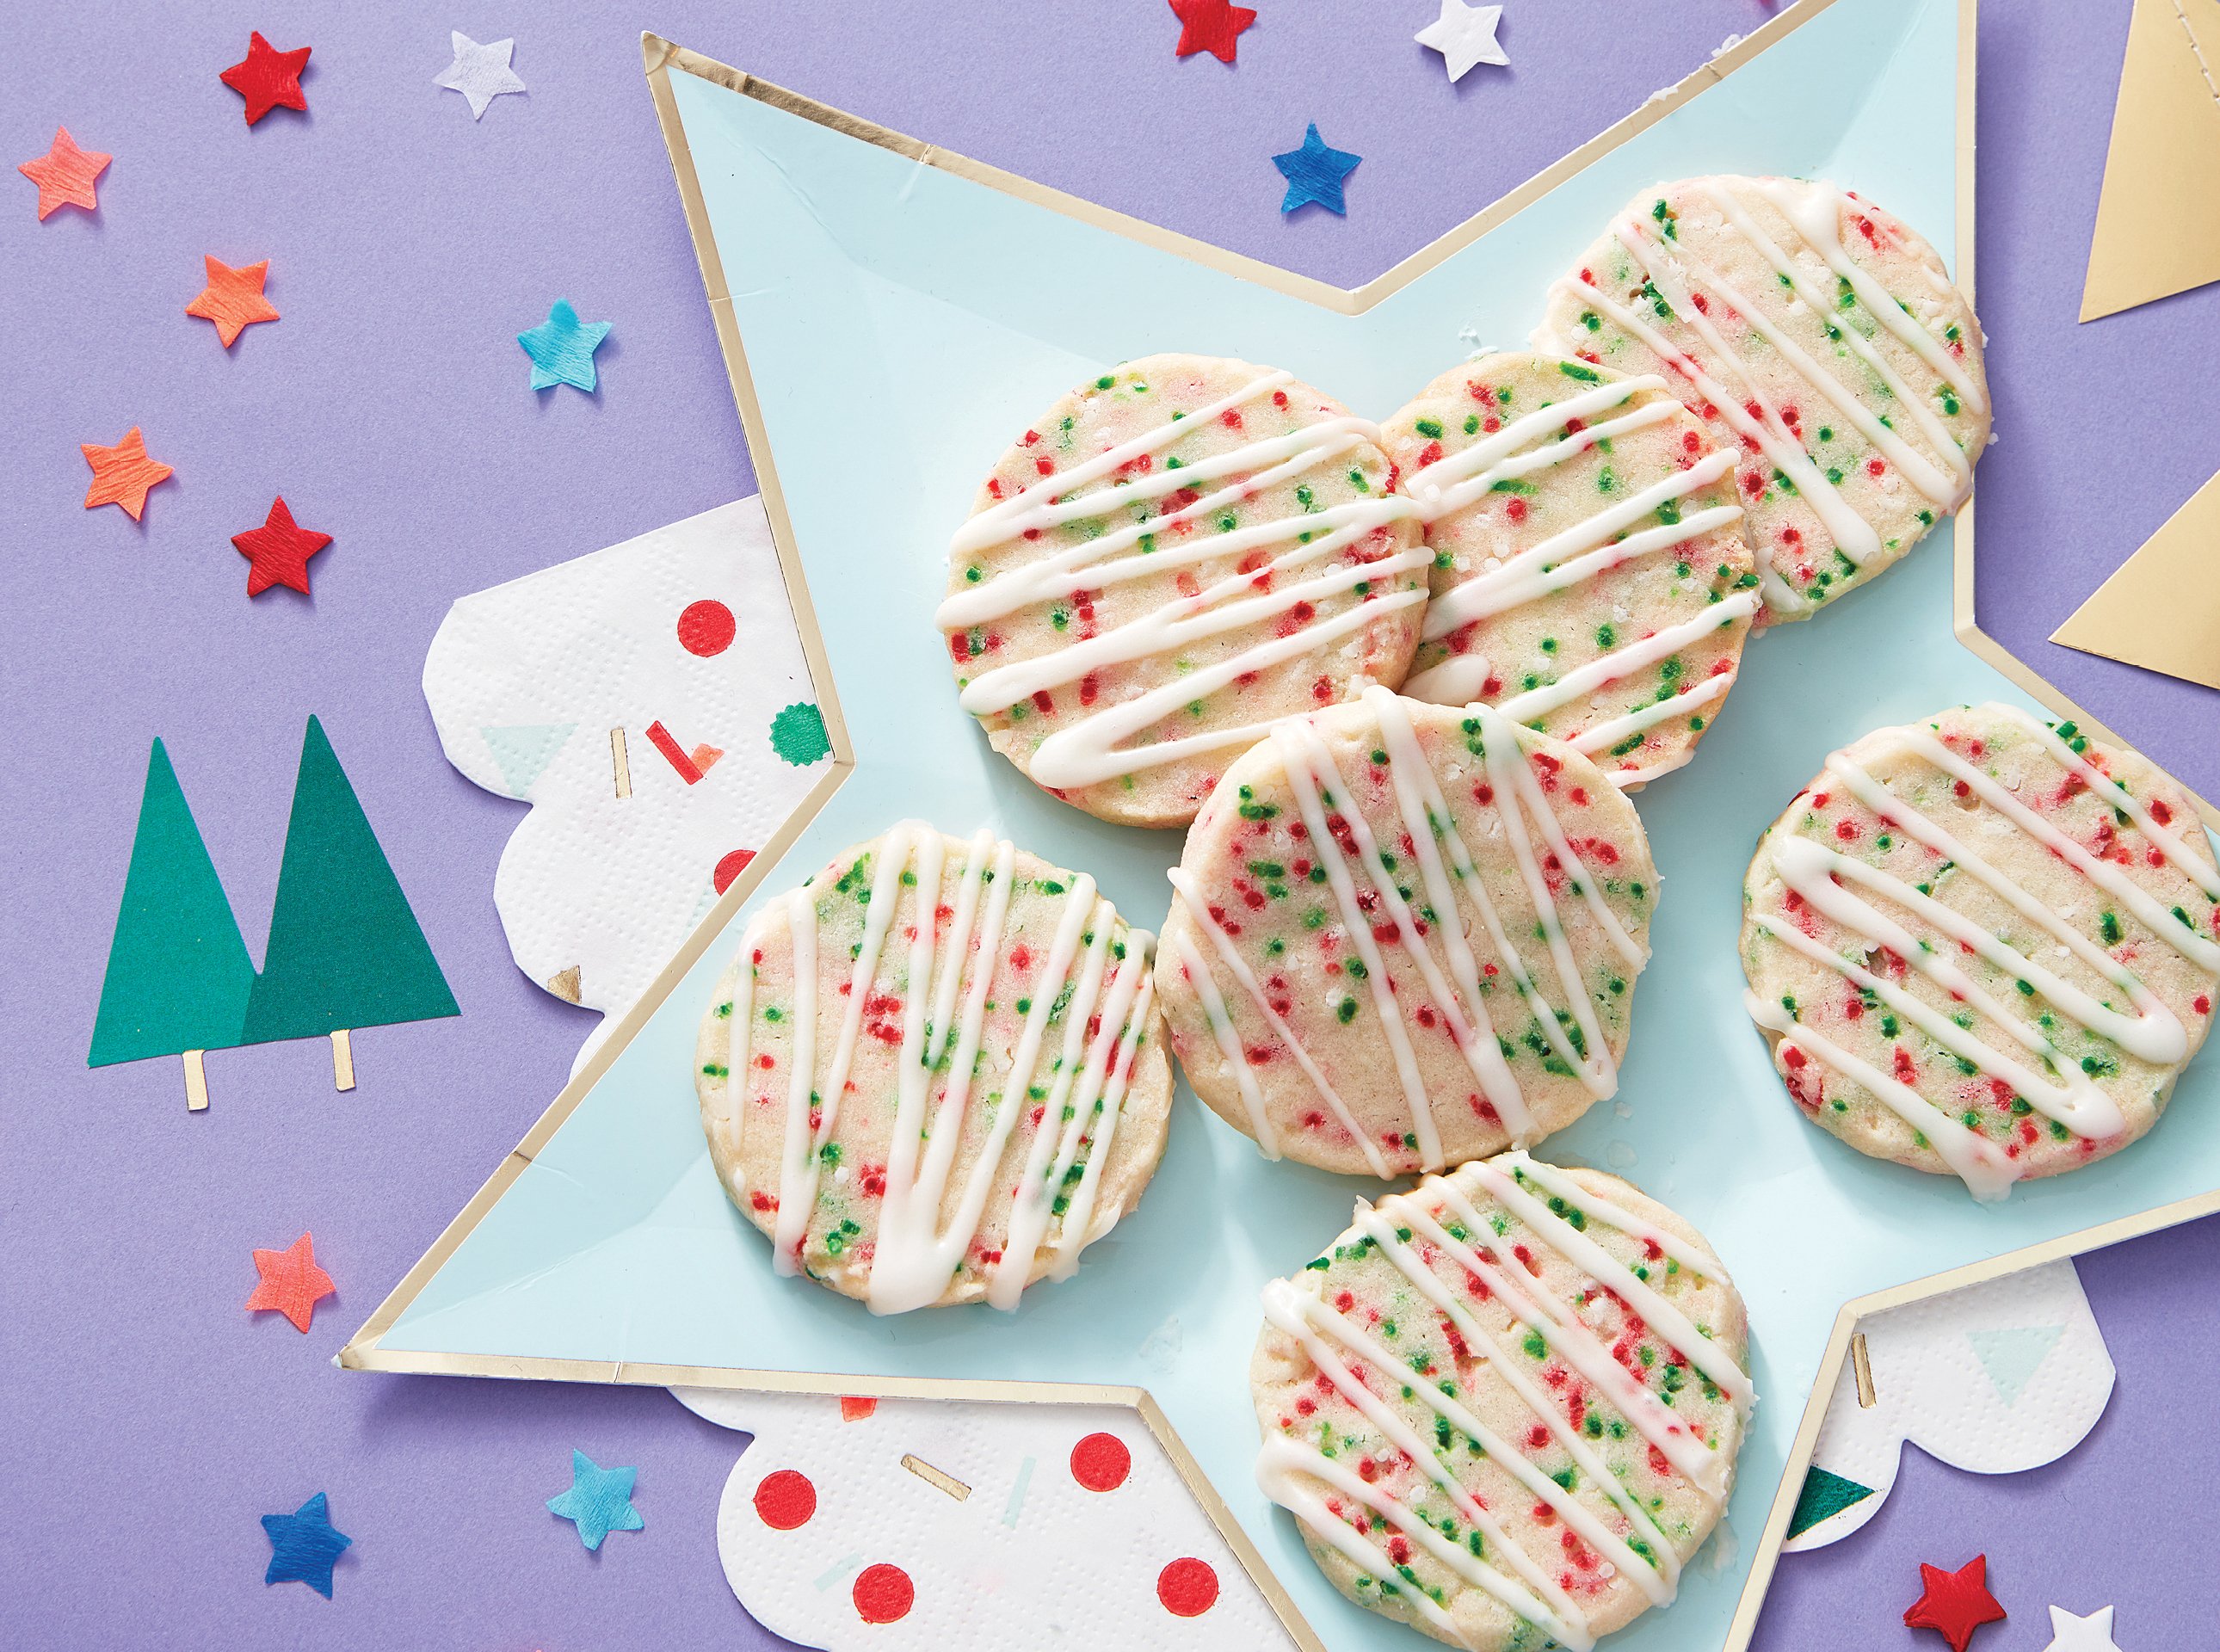 star-shaped plate filled with holiday cookies